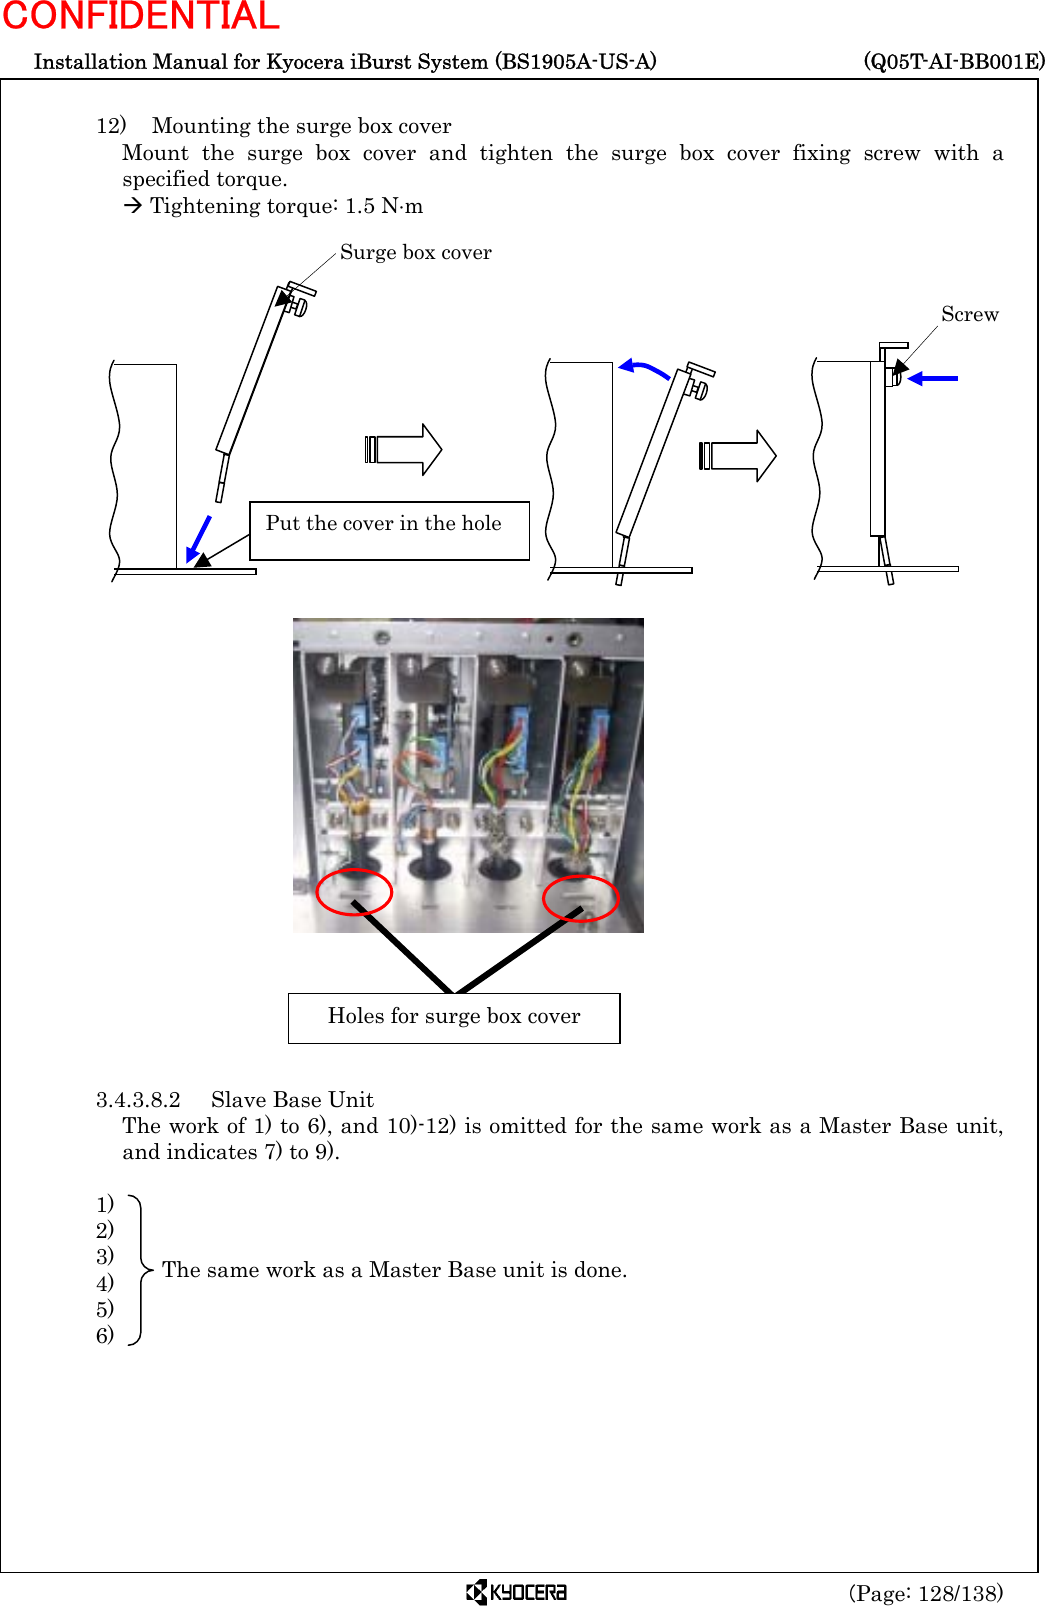  Installation Manual for Kyocera iBurst System (BS1905A-US-A)     (Q05T-AI-BB001E) (Page: 128/138) CONFIDENTIAL  12)    Mounting the surge box cover Mount the surge box cover and tighten the surge box cover fixing screw with a specified torque. Æ Tightening torque: 1.5 N⋅m                                  3.4.3.8.2  Slave Base Unit The work of 1) to 6), and 10)-12) is omitted for the same work as a Master Base unit, and indicates 7) to 9).  1)    2)    3)    4)    5)    6)            Surge box cover  Screw  Put the cover in the hole  Holes for surge box cover The same work as a Master Base unit is done. 